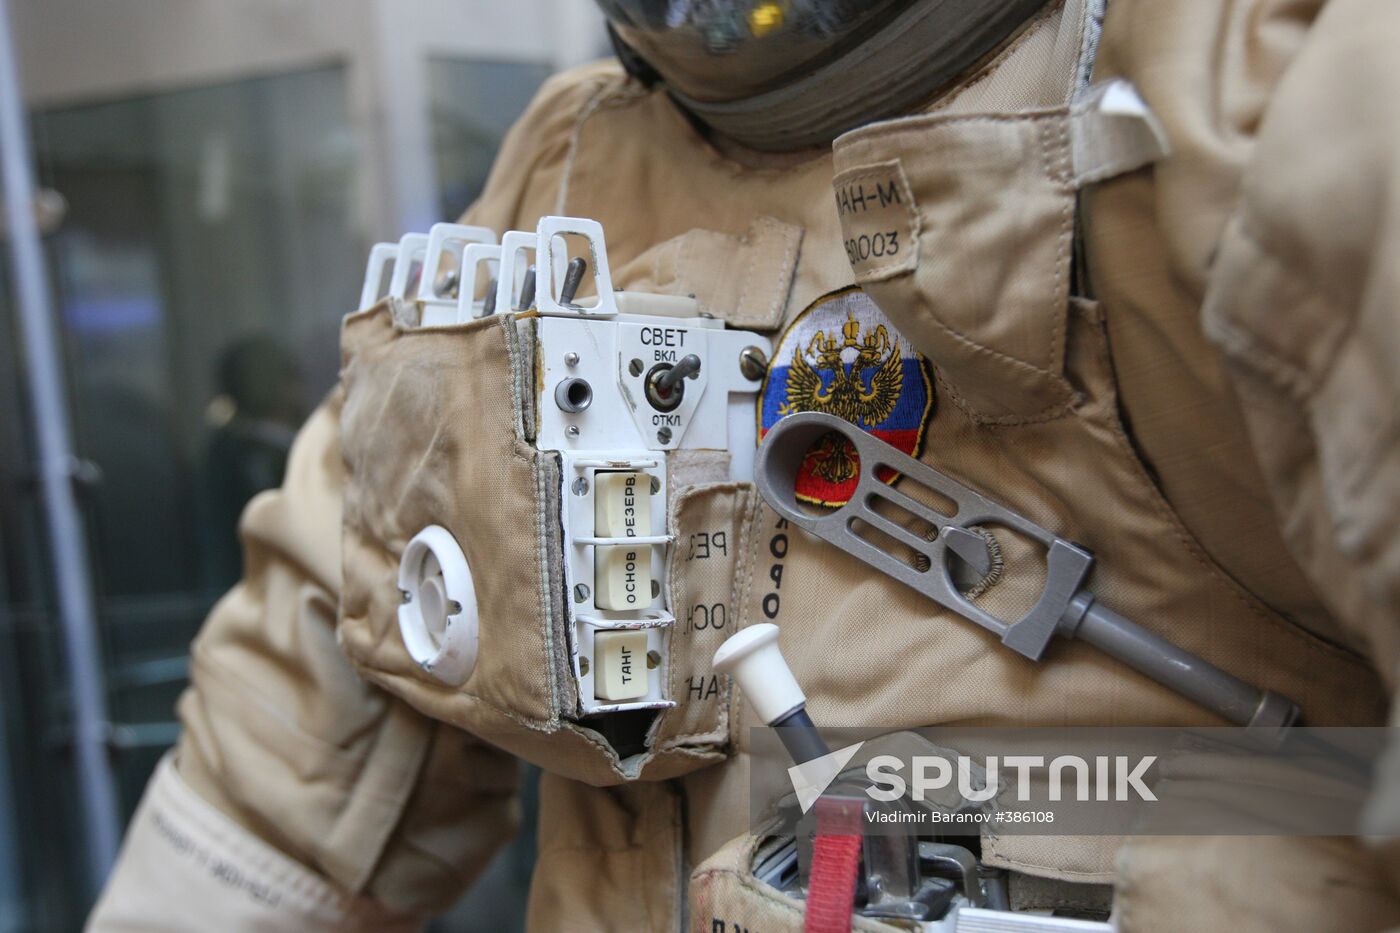 An Orlan-M space suit